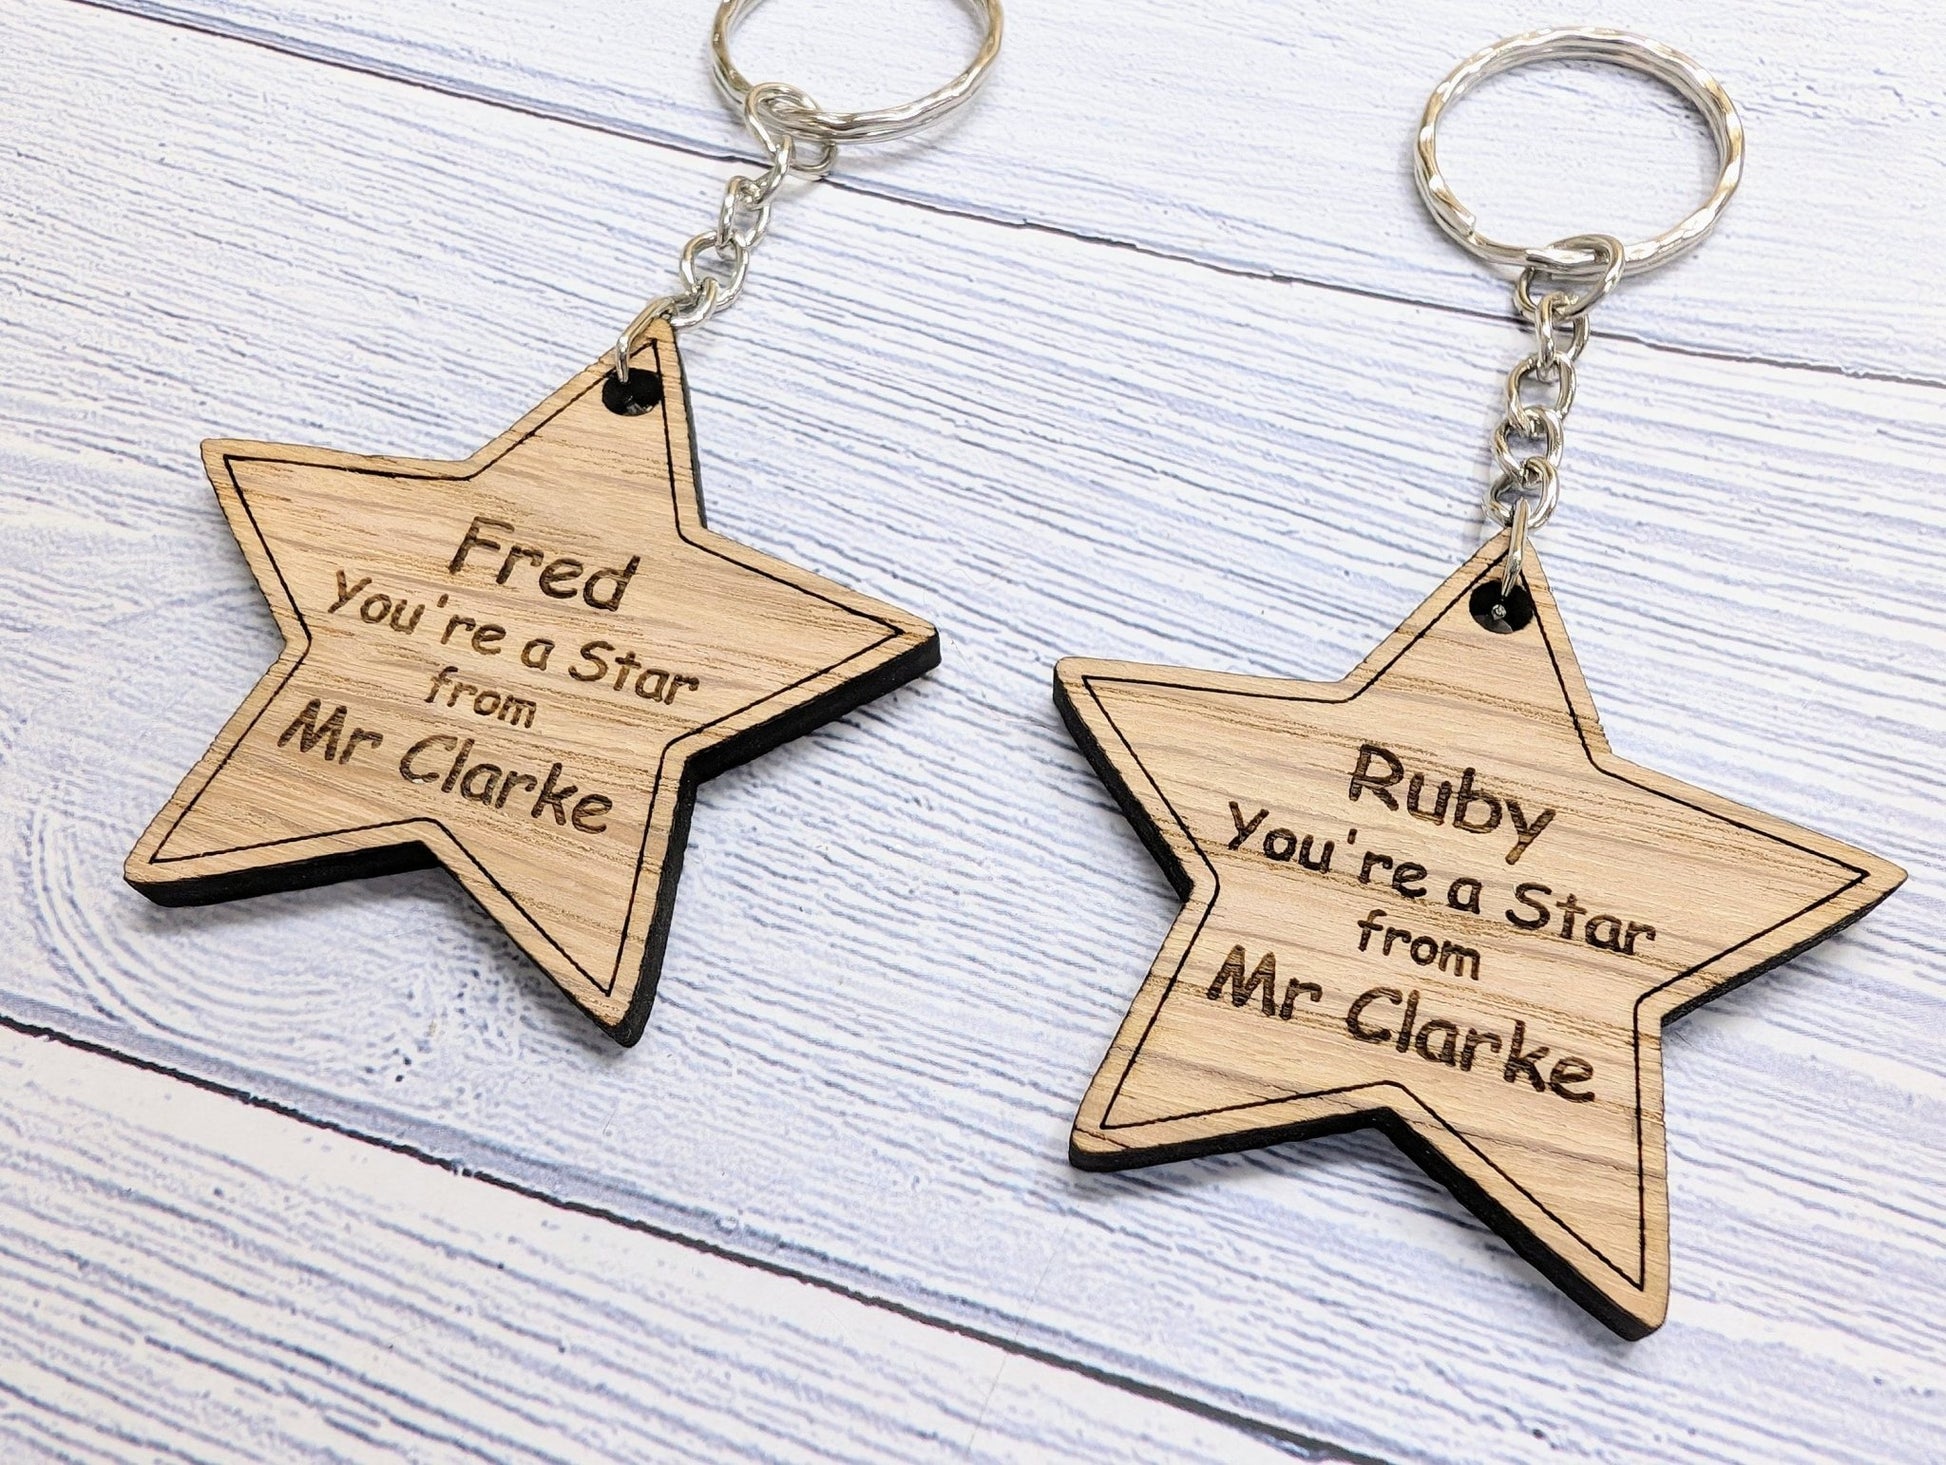 Personalised 'You're a Star' Keyring - Wooden Student Gift, End of Year - Custom Name Engraved - Ideal Gift for Students from Teachers - CherryGroveCraft